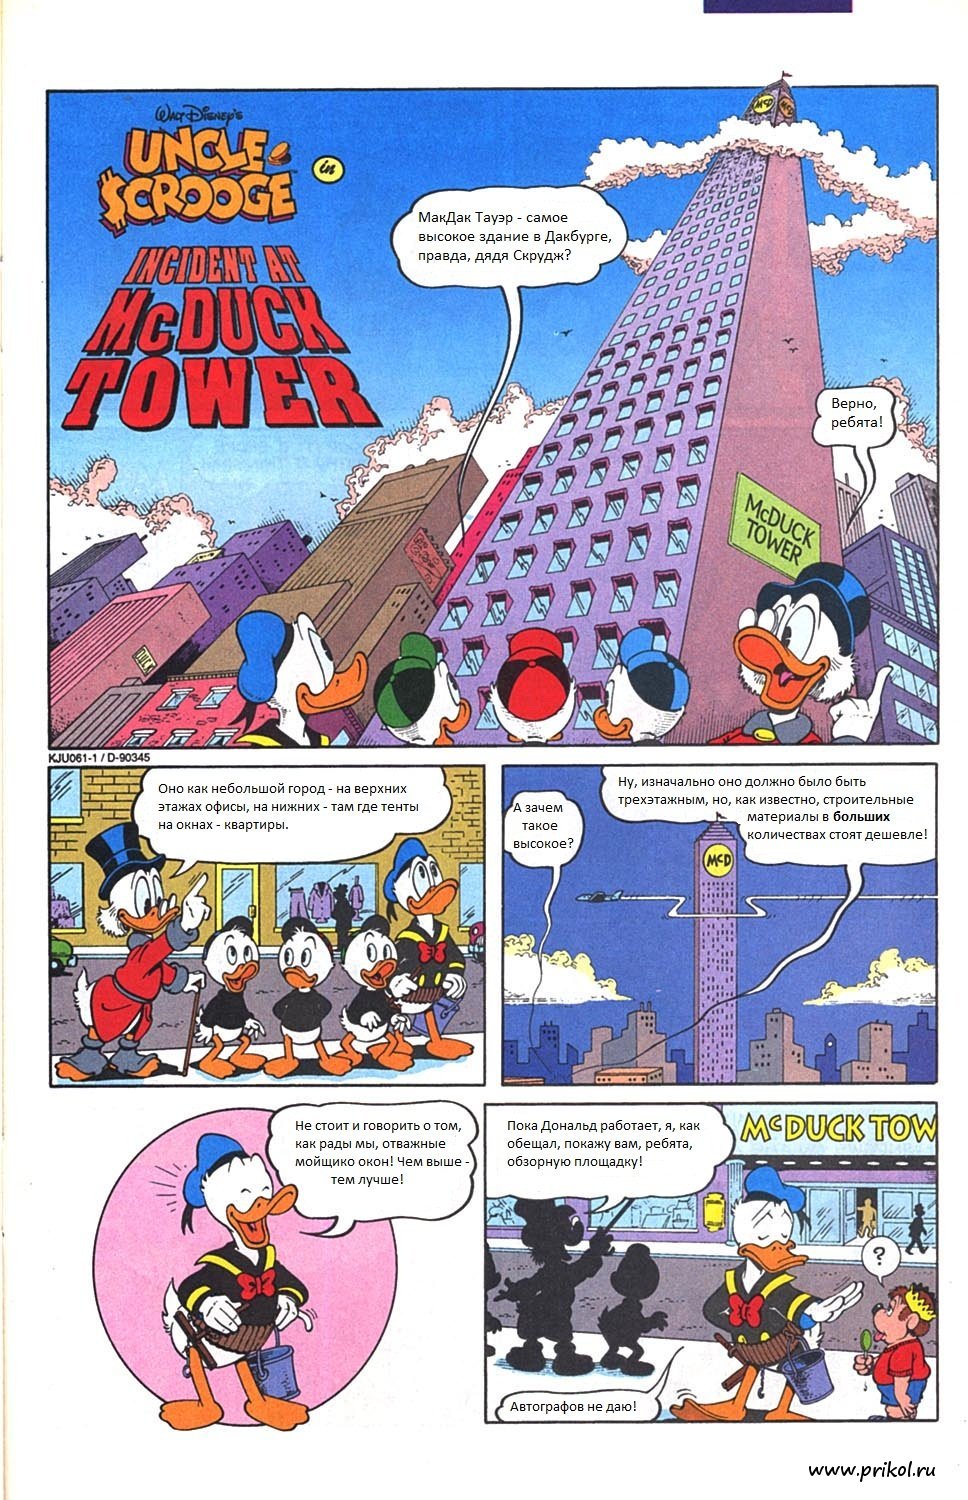 incident-at-mcduck-tower-01